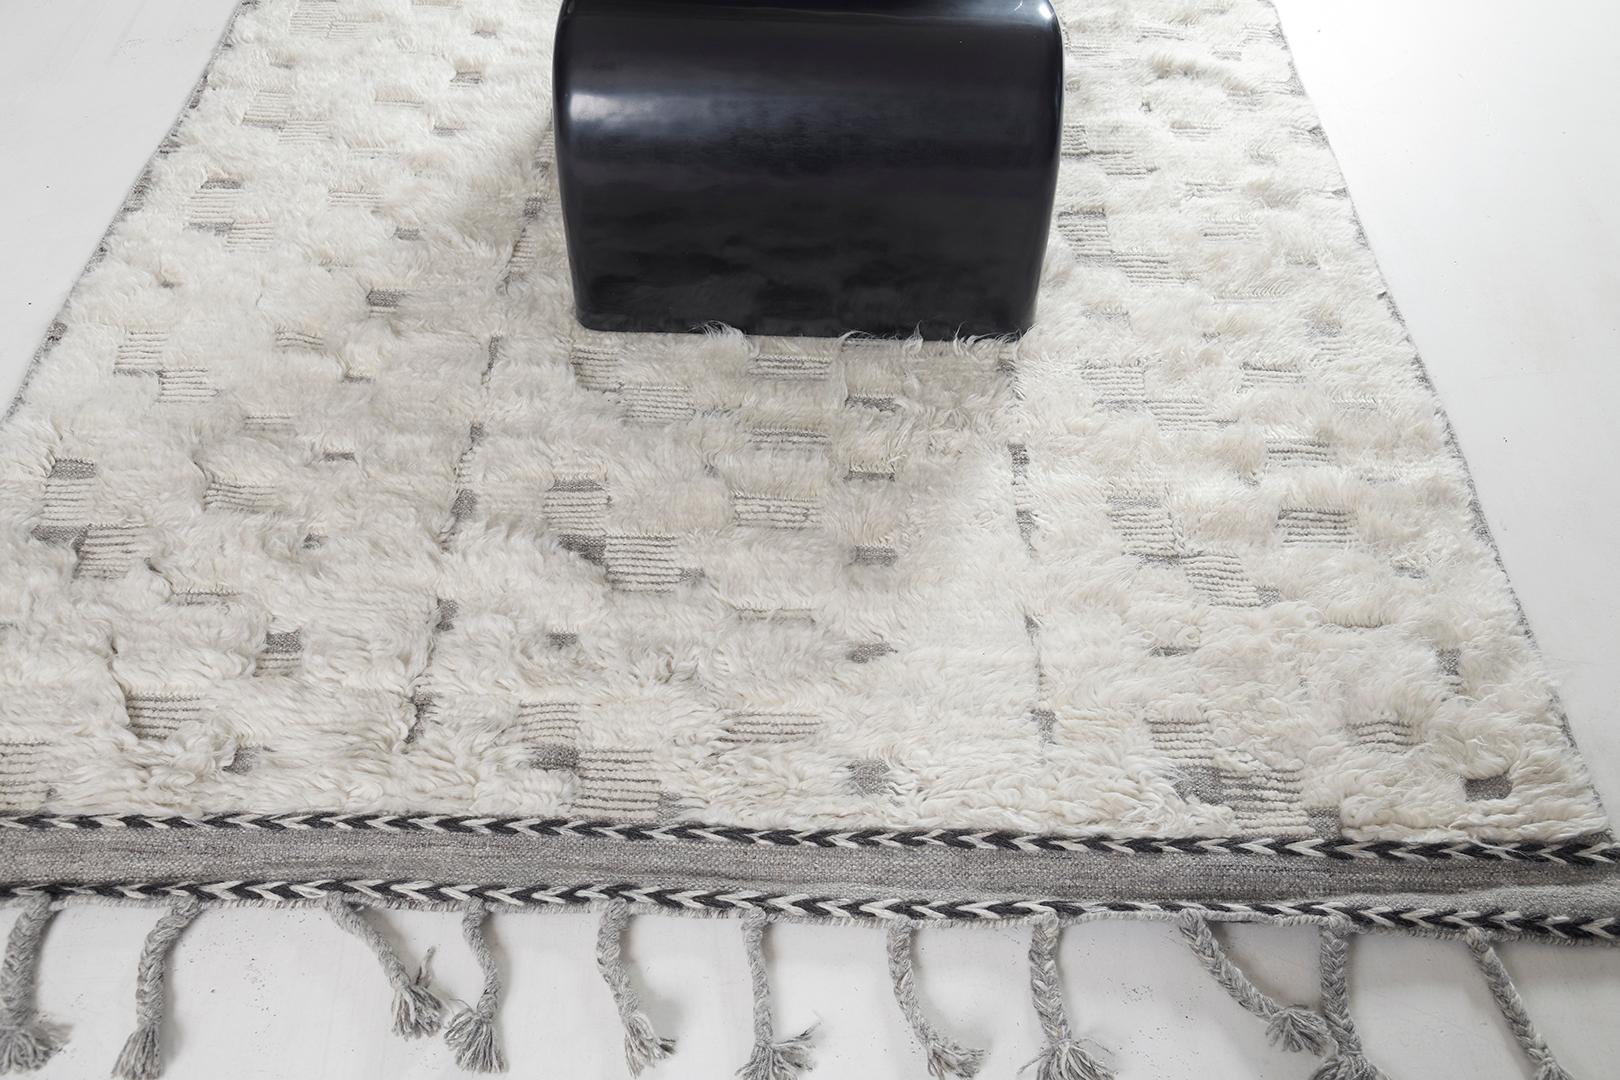 Crane’ is a gorgeously detailed pile weave from our Sandpiper Collection. The luxurious texture of the plush neutral grayscale design scheme gives an alluring and sophisticated ambiance. Sandpiper collection designed in Los Angeles has been named